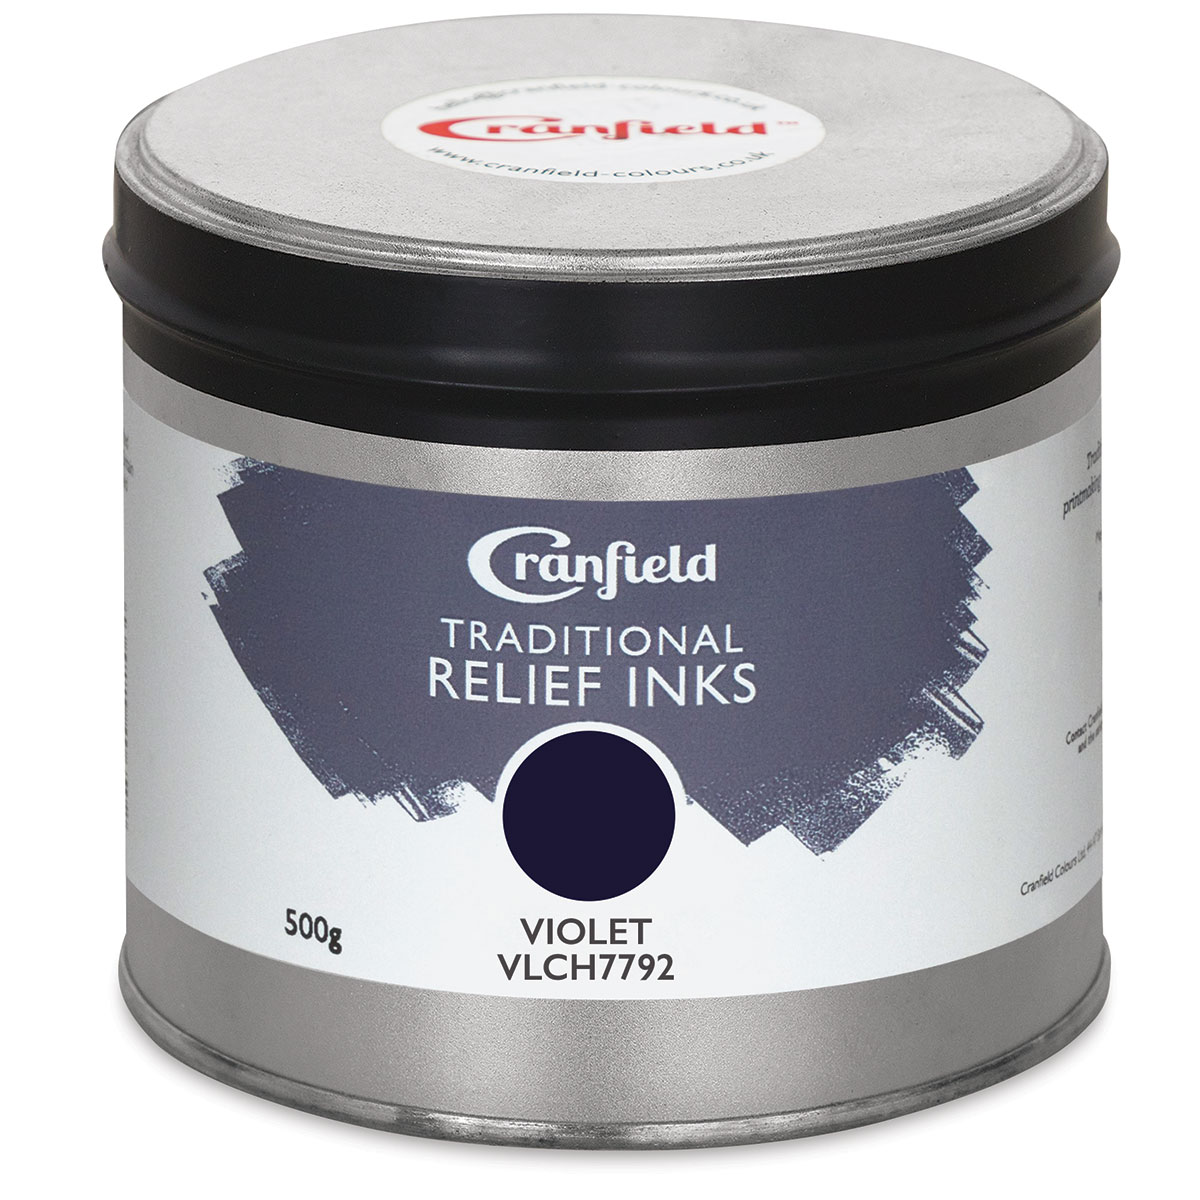 Cranfield Traditional Relief Ink - Violet, 500 g